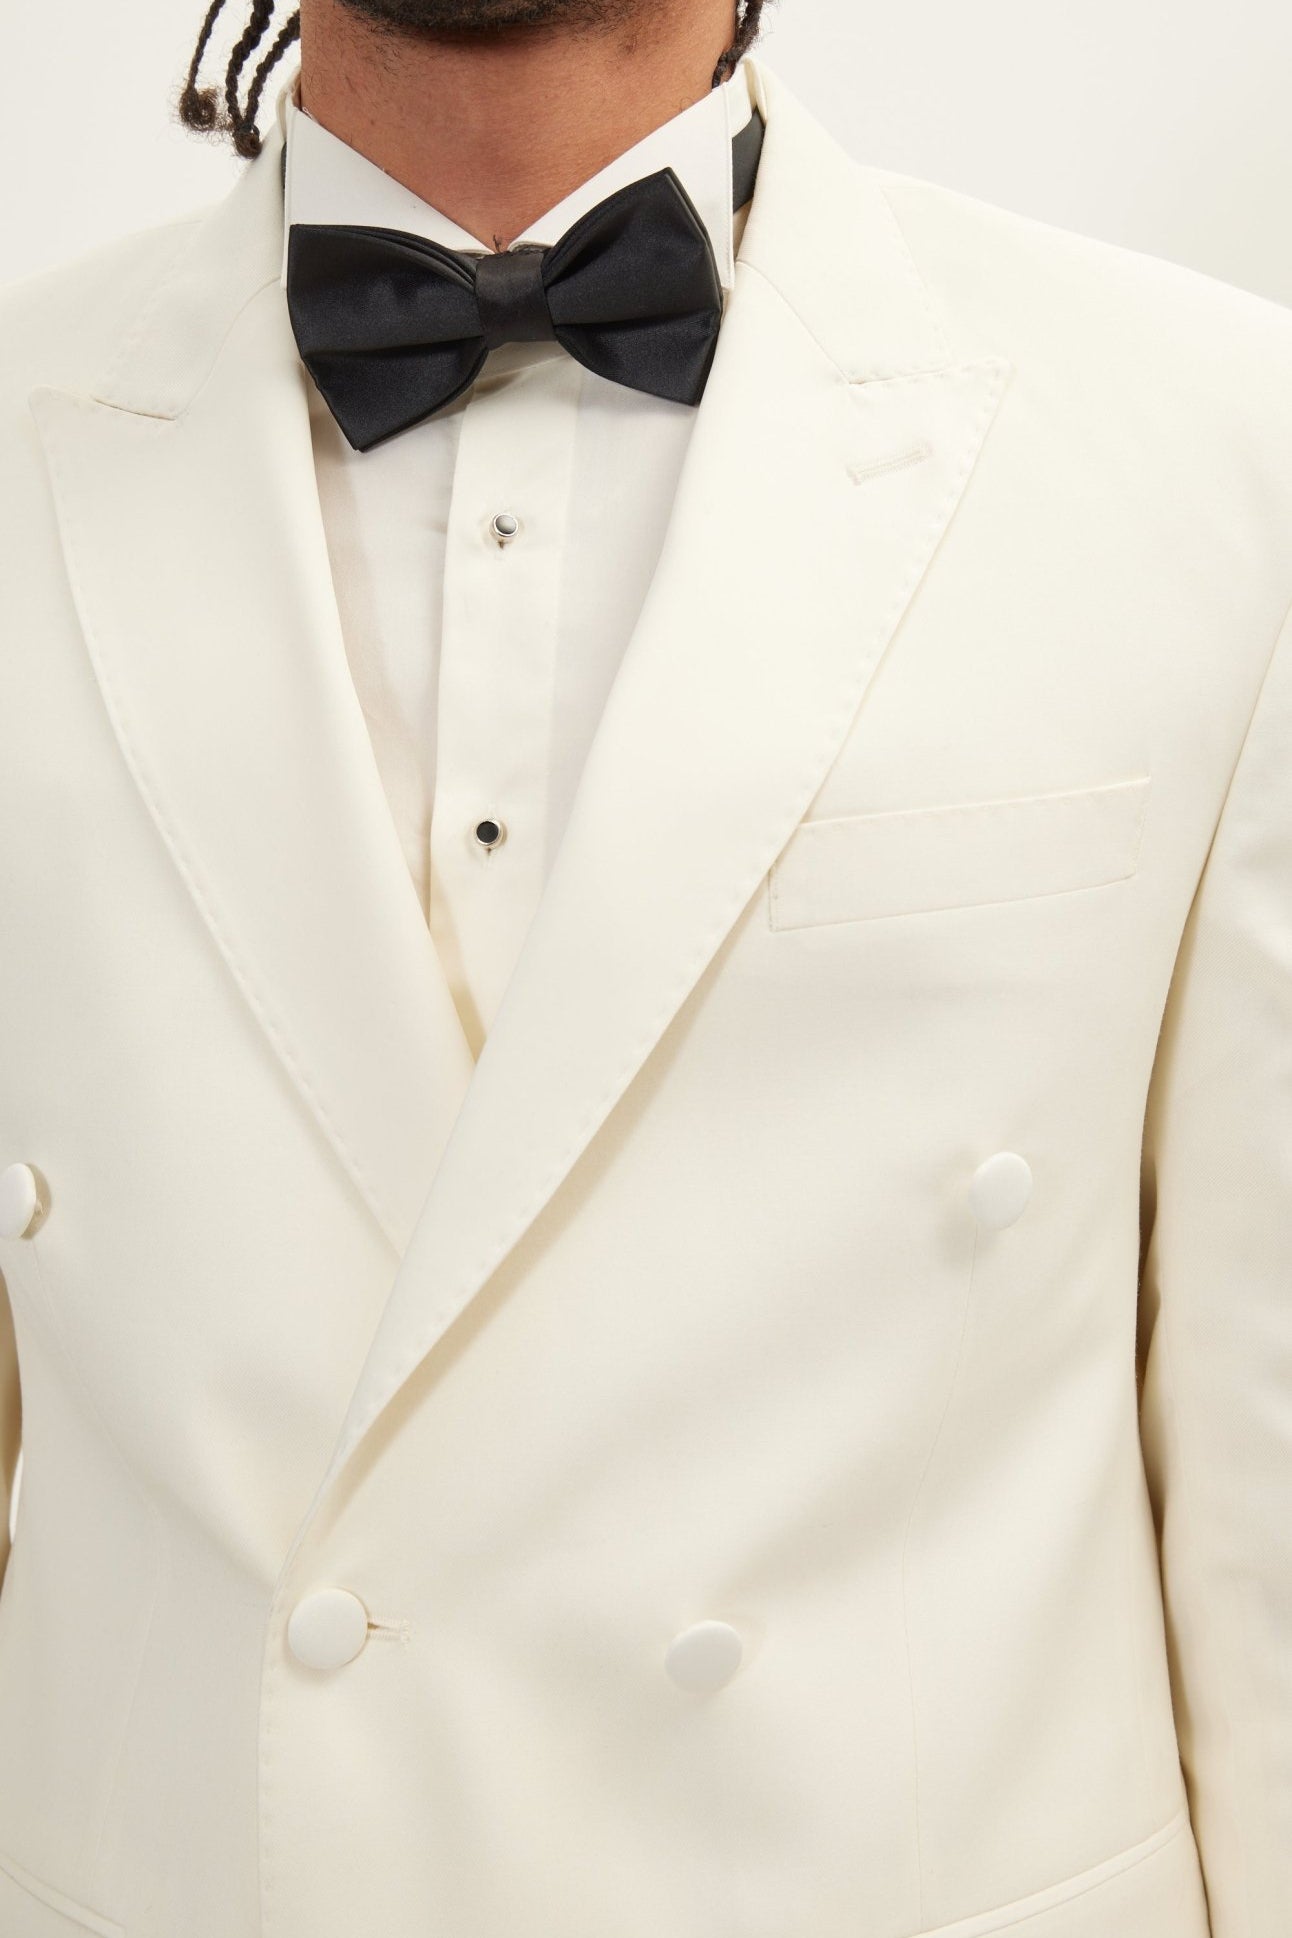 Super 180S Wool and Silk Double Breasted Tuxedo Suit - Off White - Ron Tomson